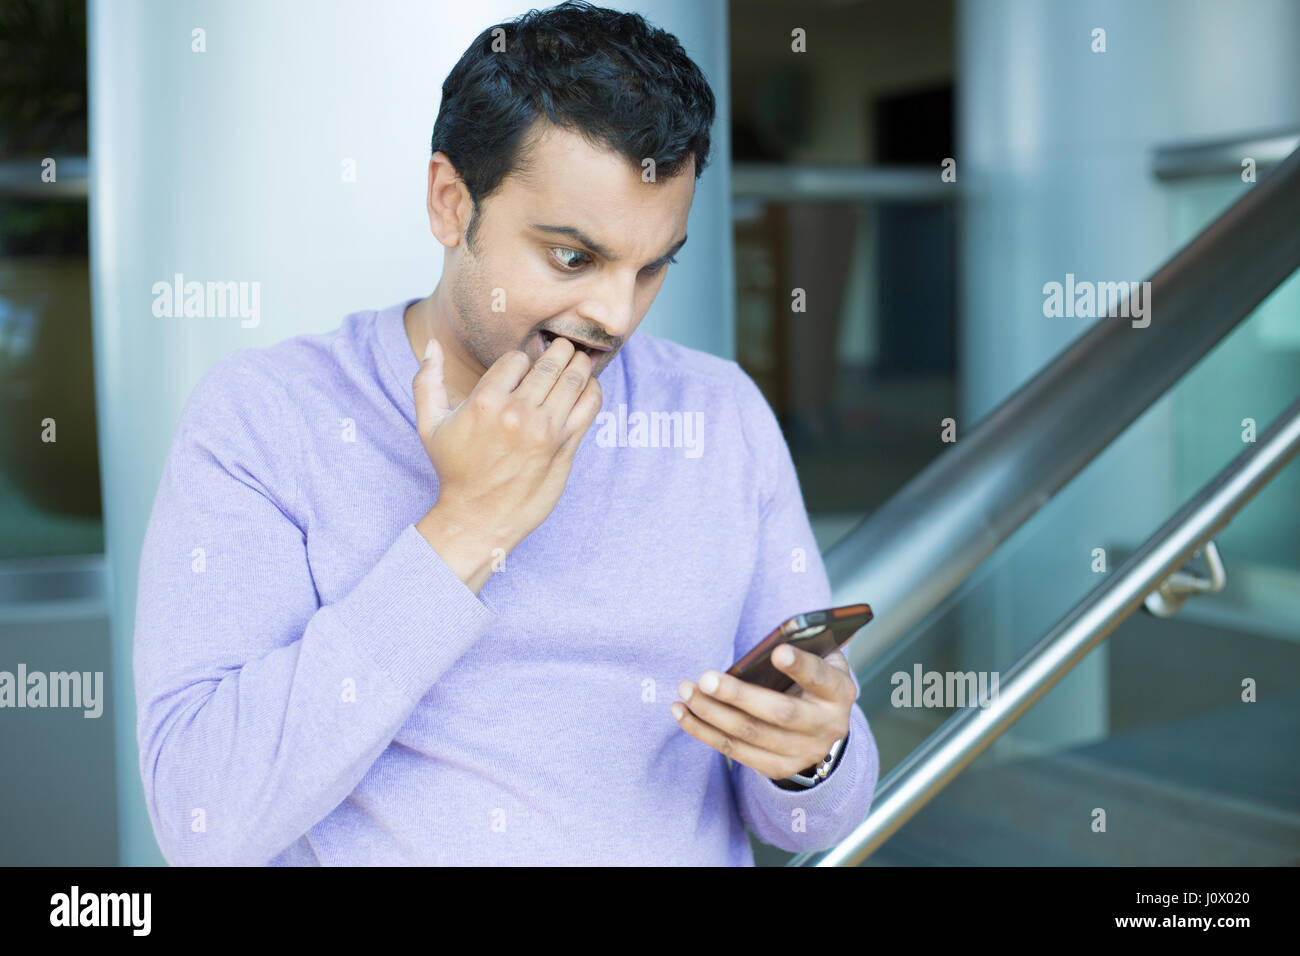 Closeup portrait, funny young man, shocked surprised, biting fingernails, by what he sees on his cell phone, isolated indoors office background. Negat Stock Photo